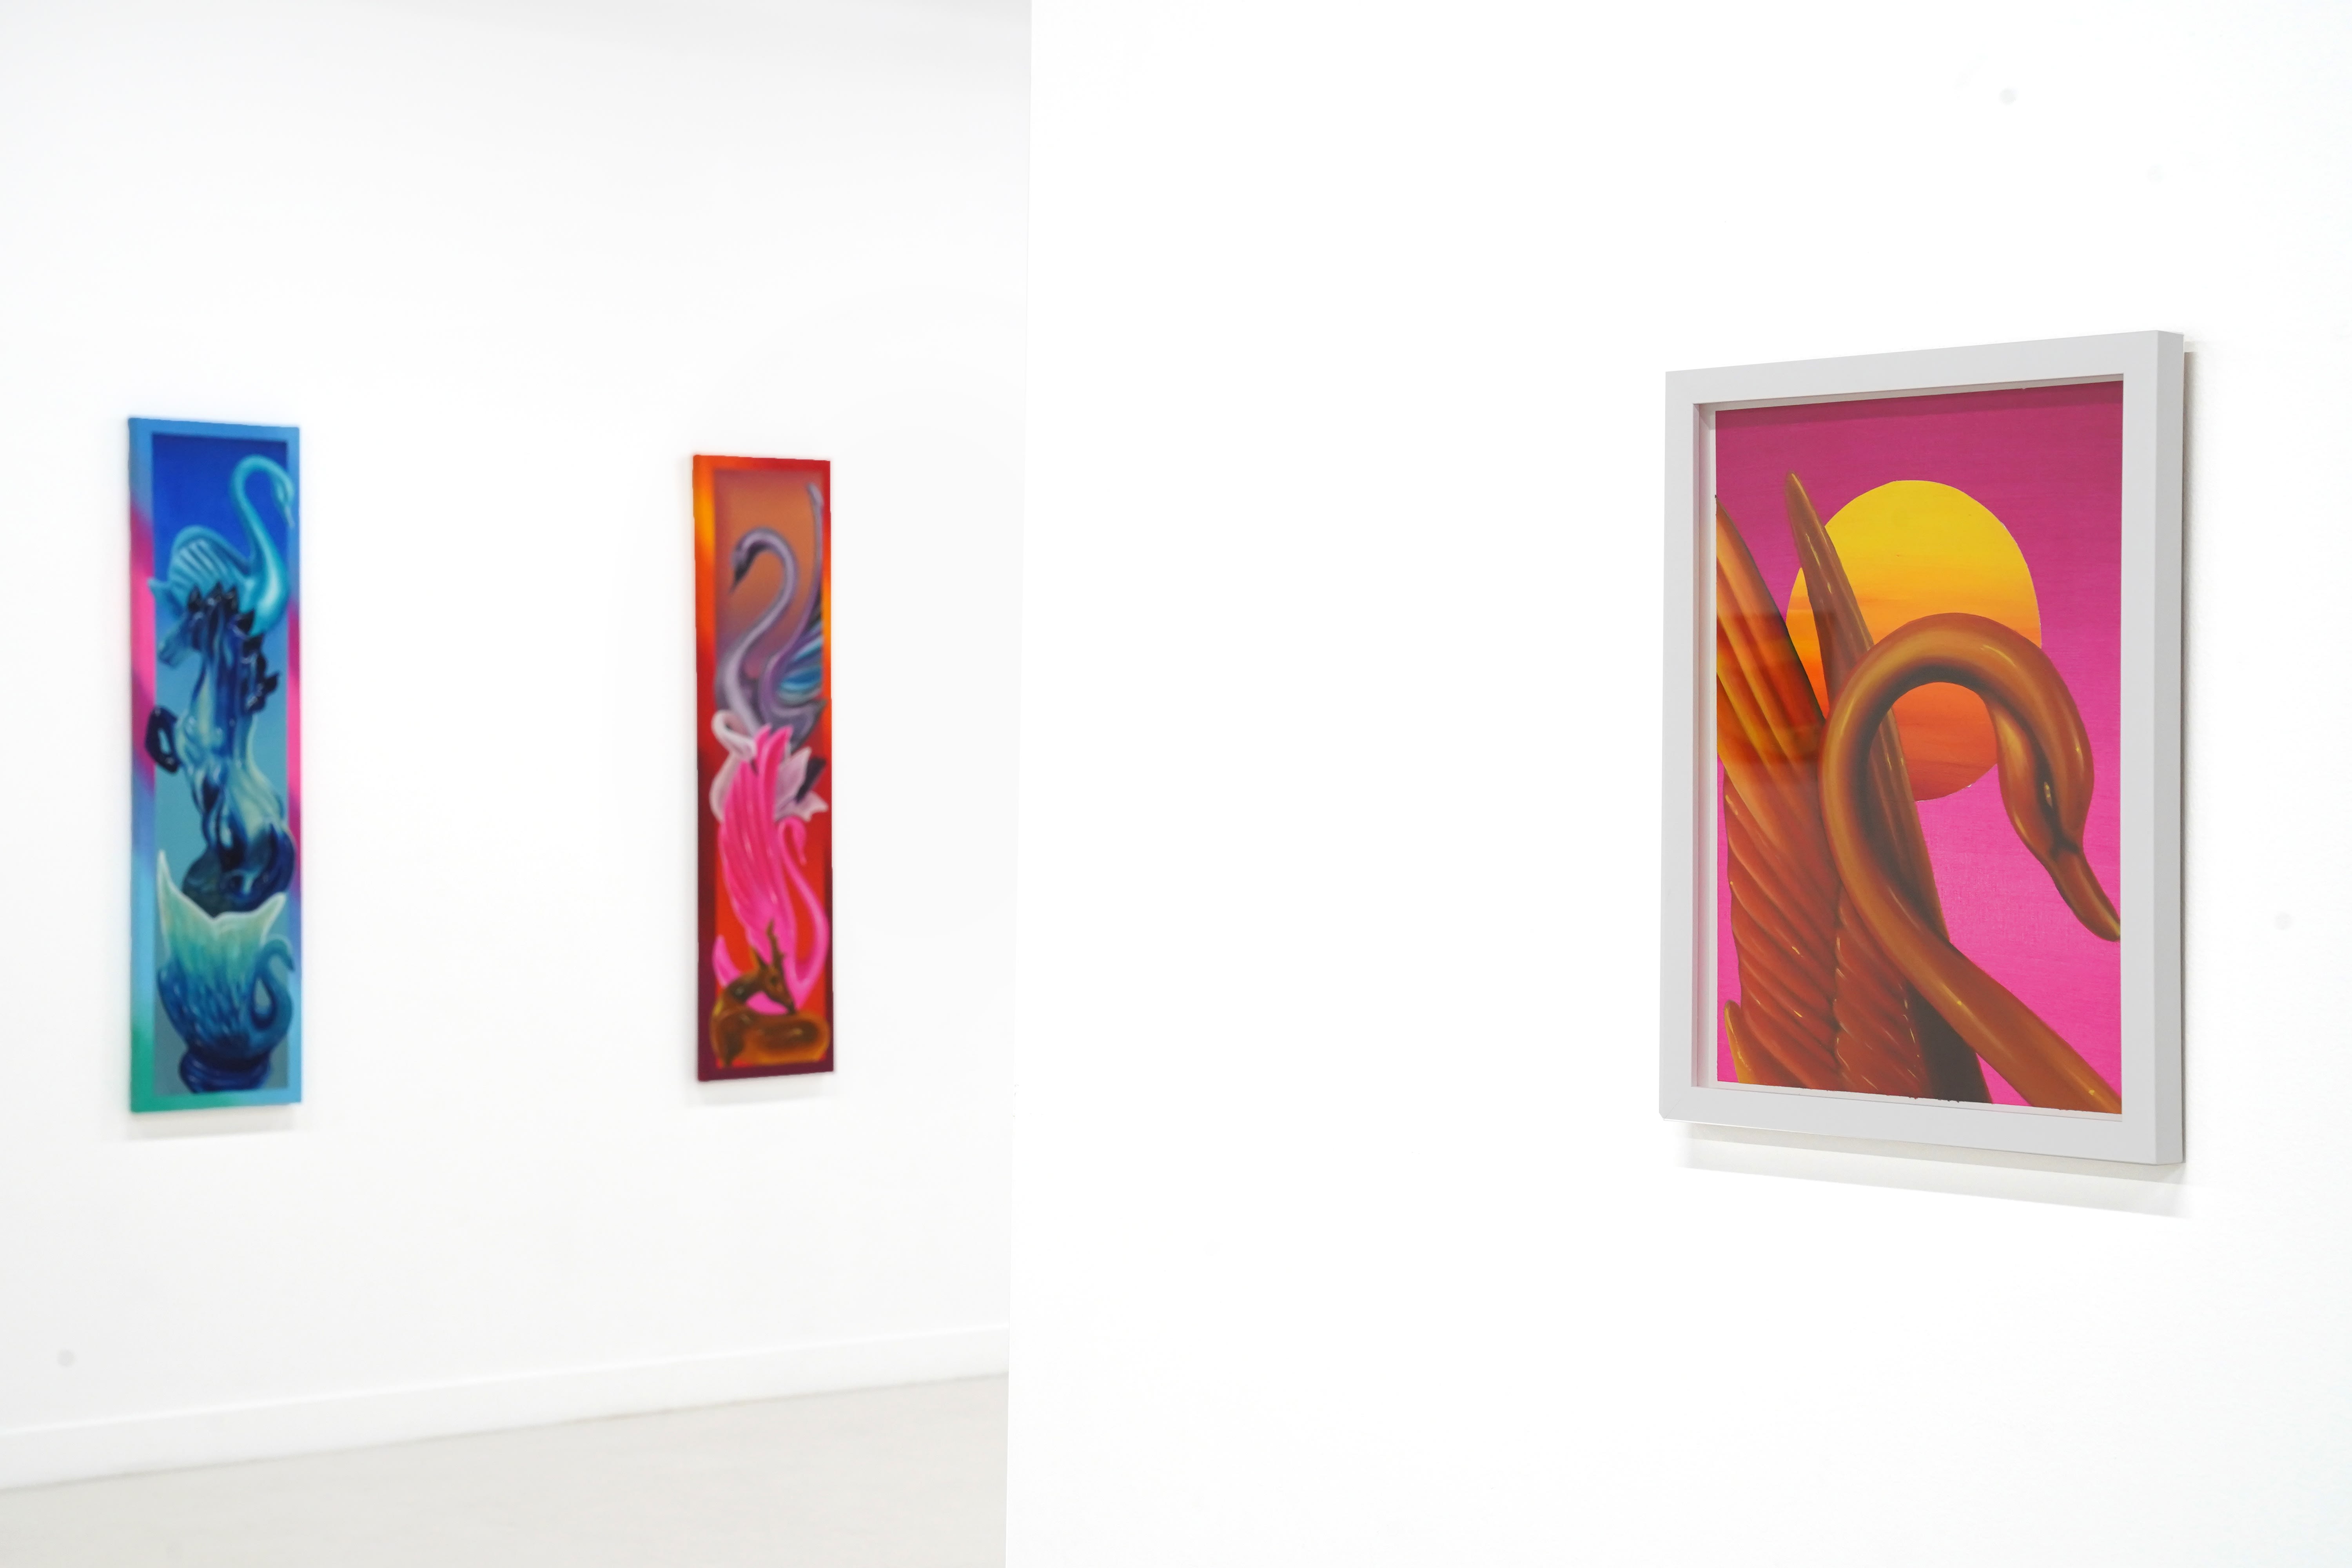 photo of 3 paintings by douglas de souza hanging on the wall